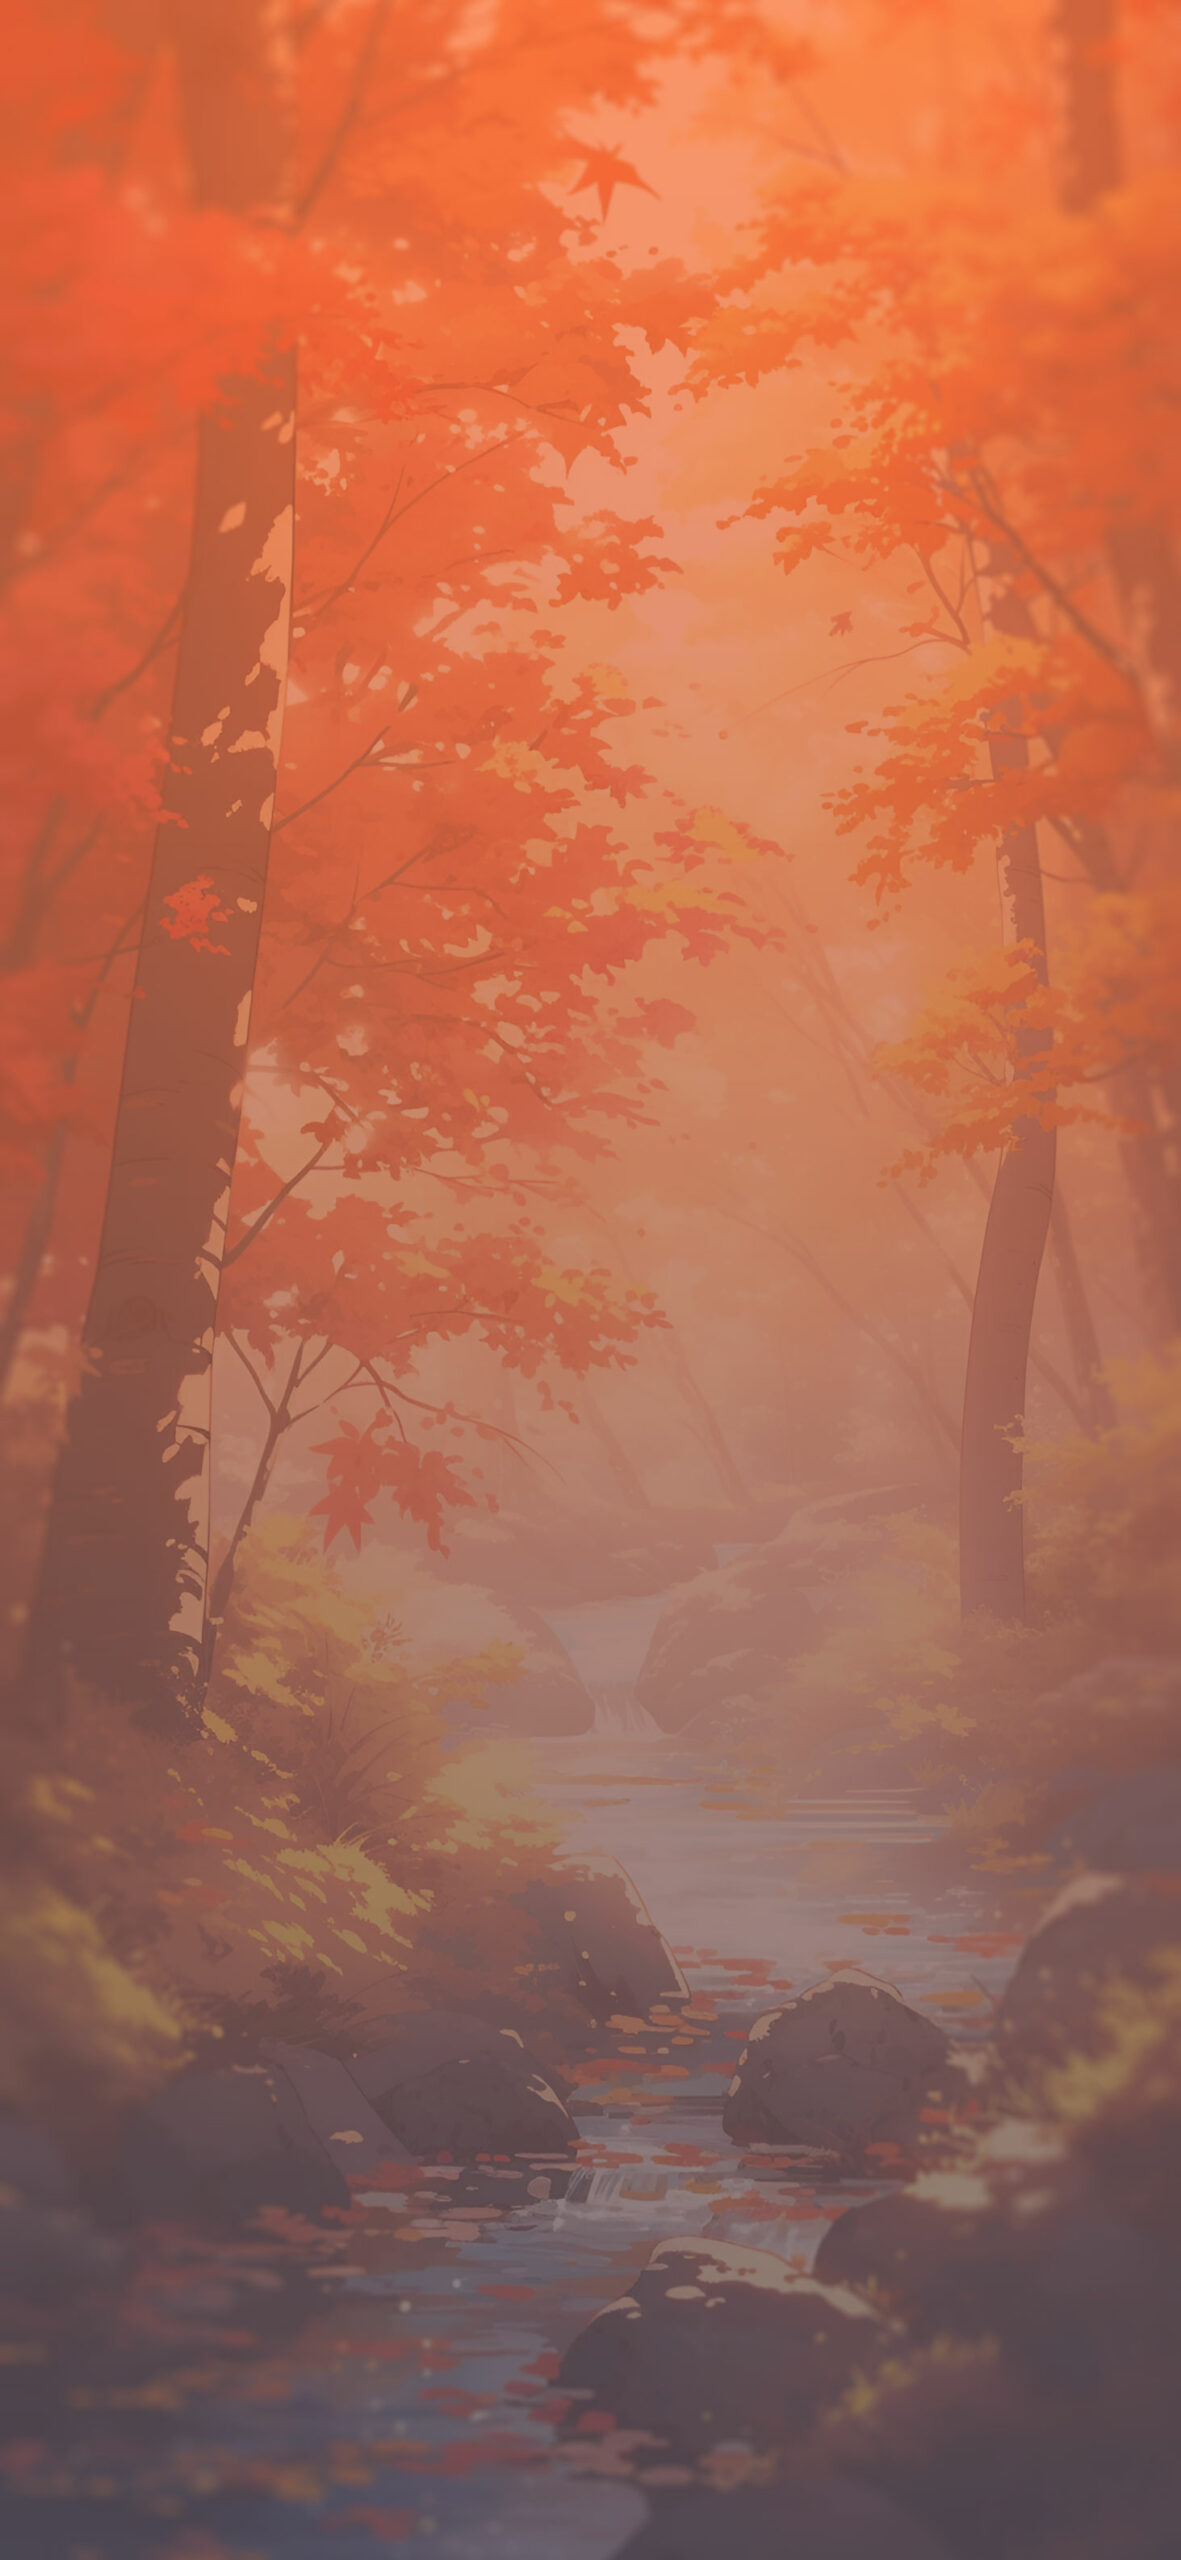 Stream in the autumn forest nature wallpaper Sunny fall forest